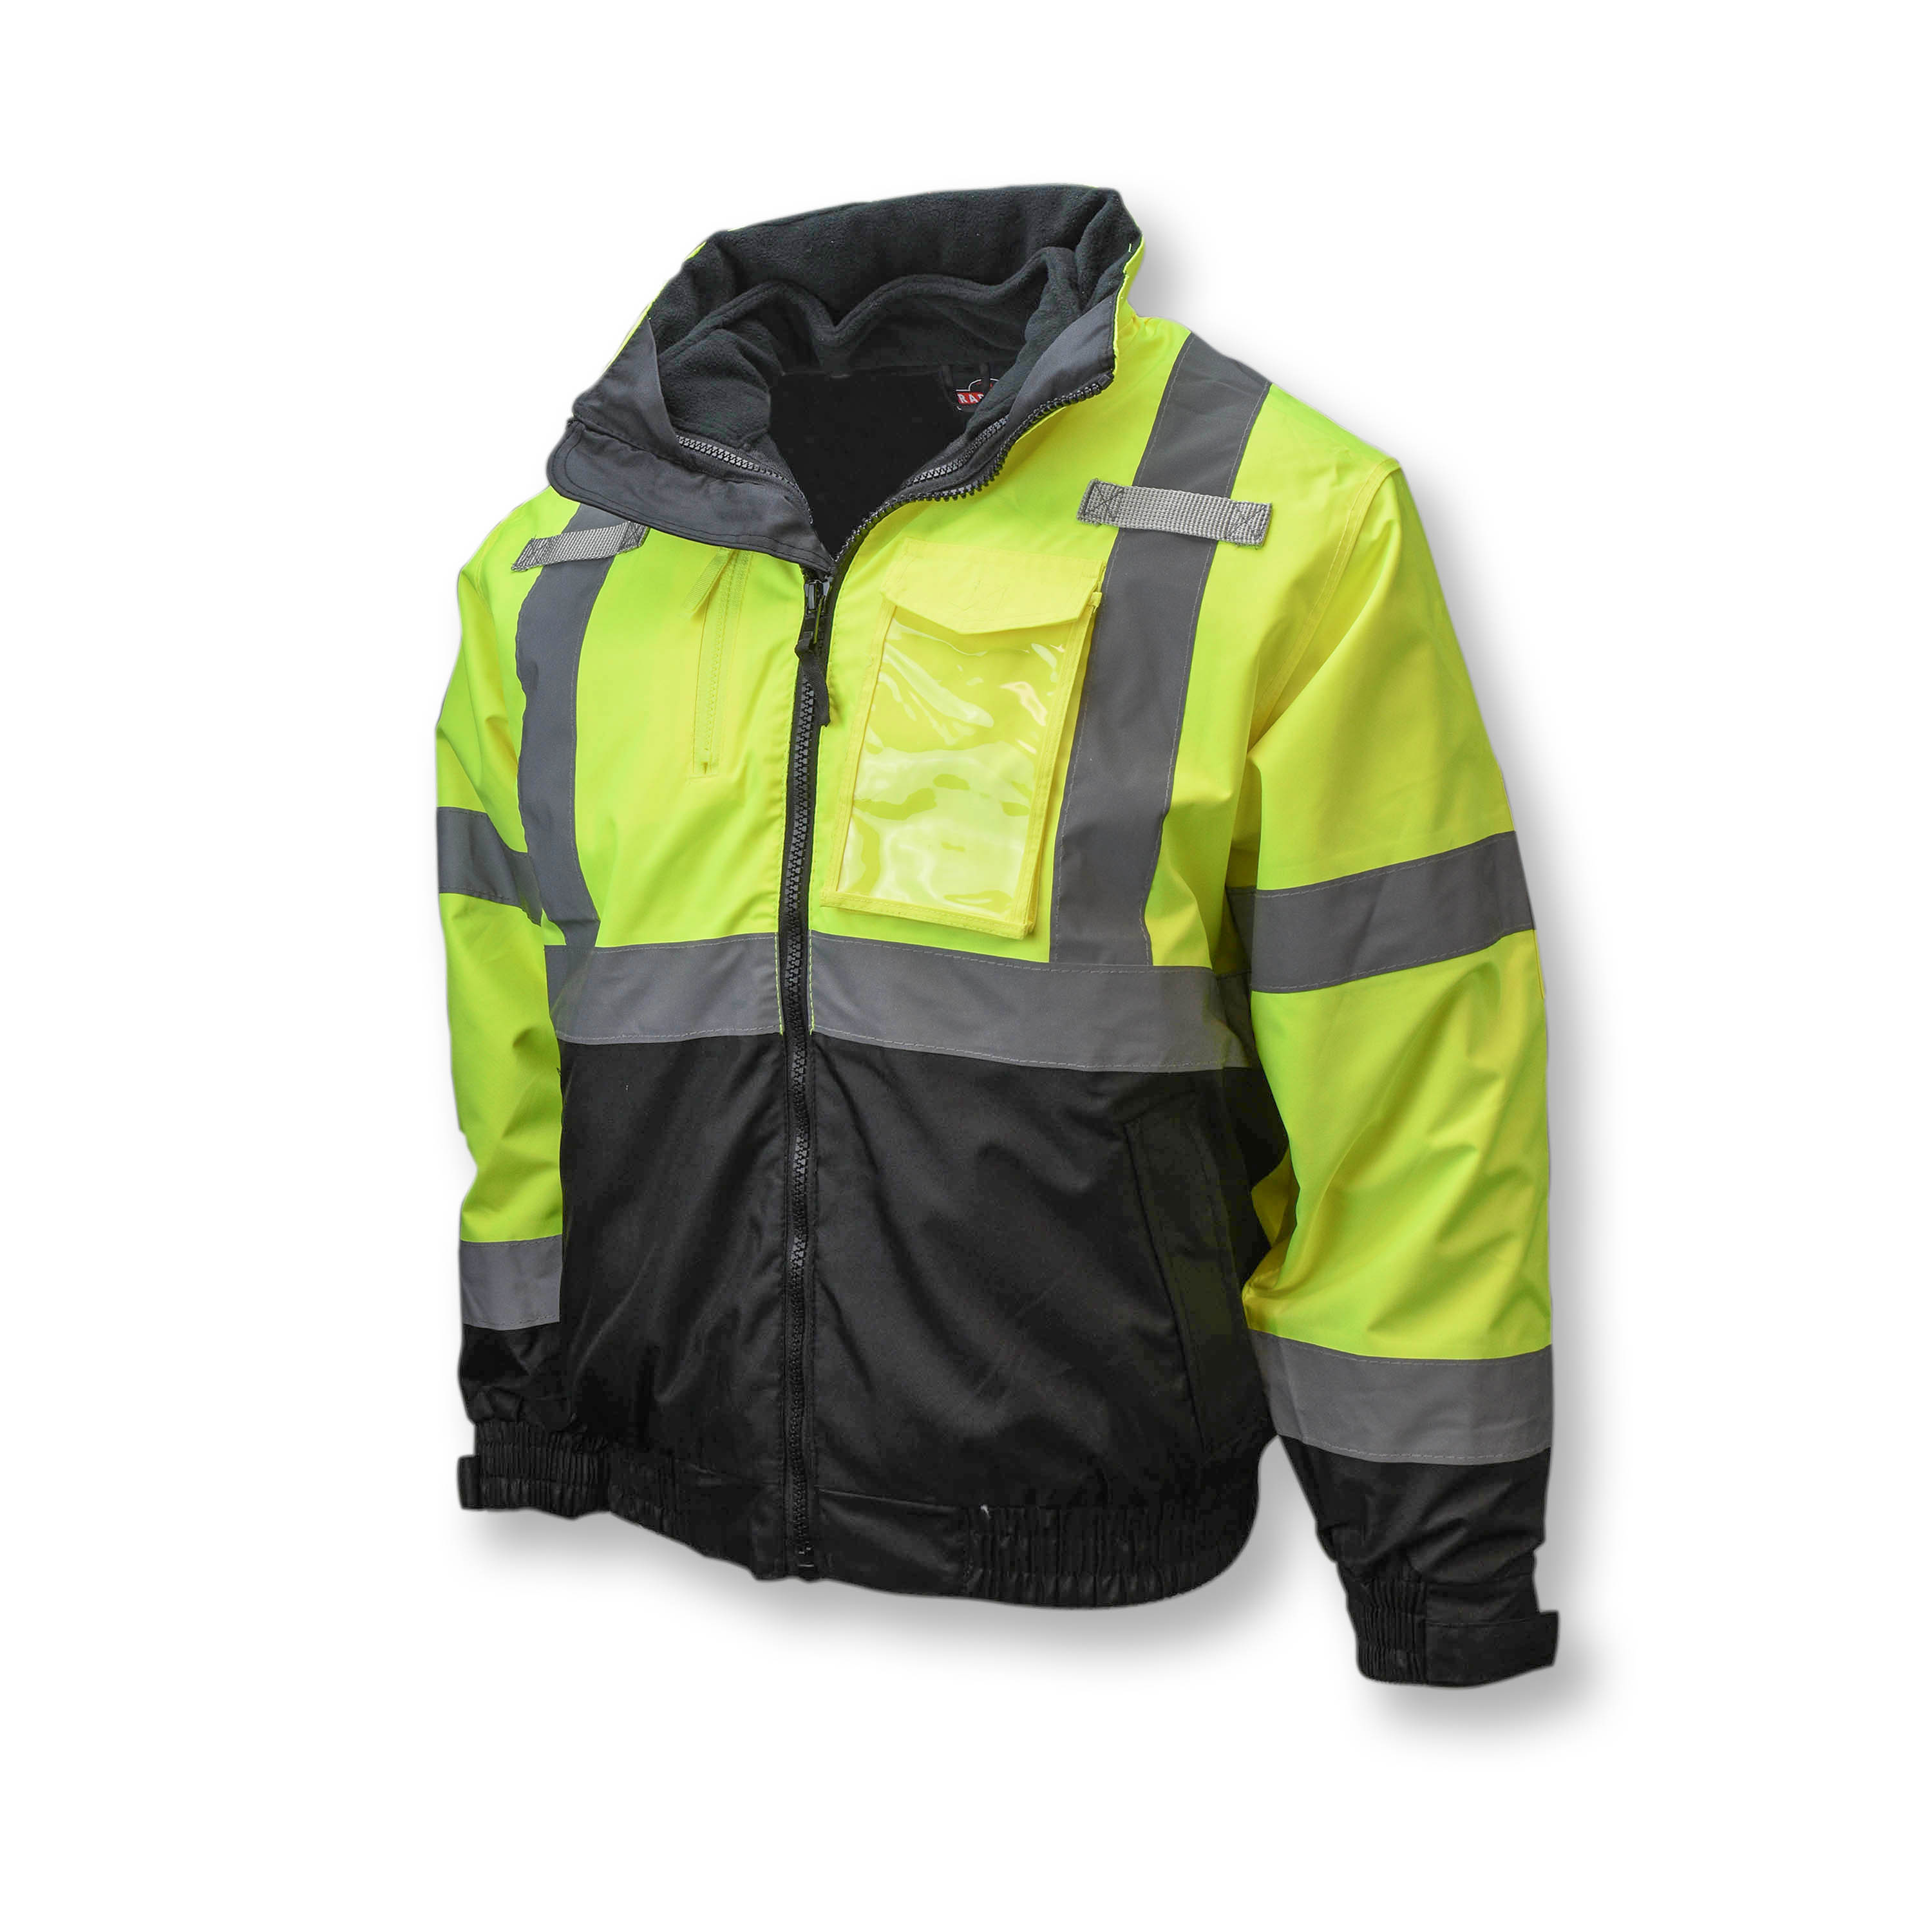 SJ210B Three-in-One Deluxe High Visibility Bomber Jacket - Green/Black Bottom - Size M